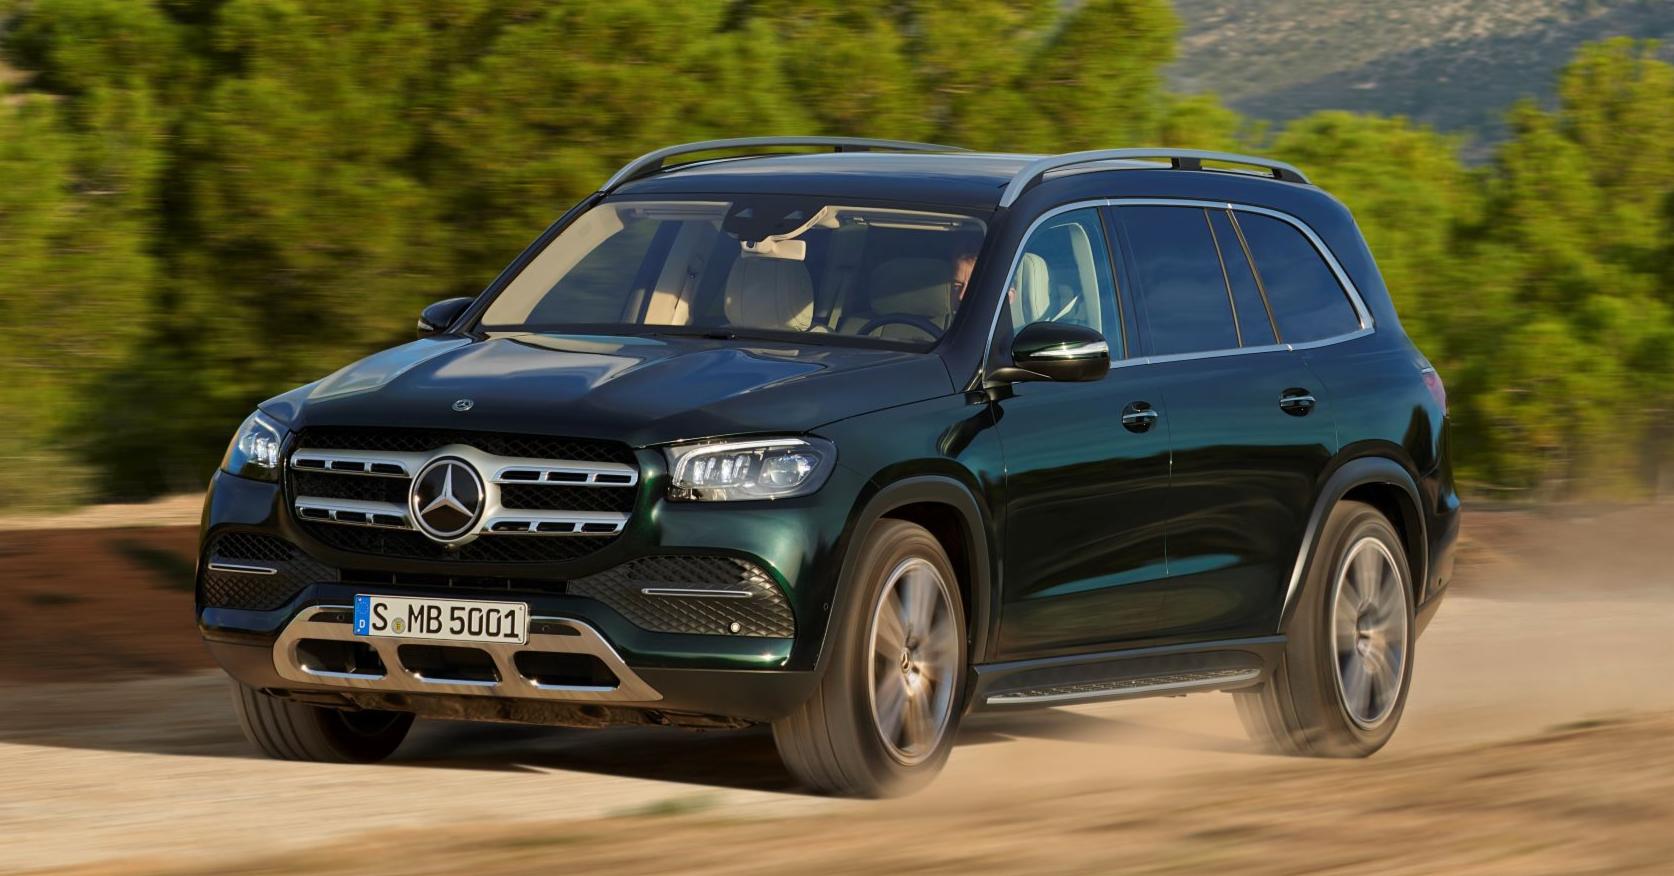 What's the Biggest Mercedes-Benz SUV?